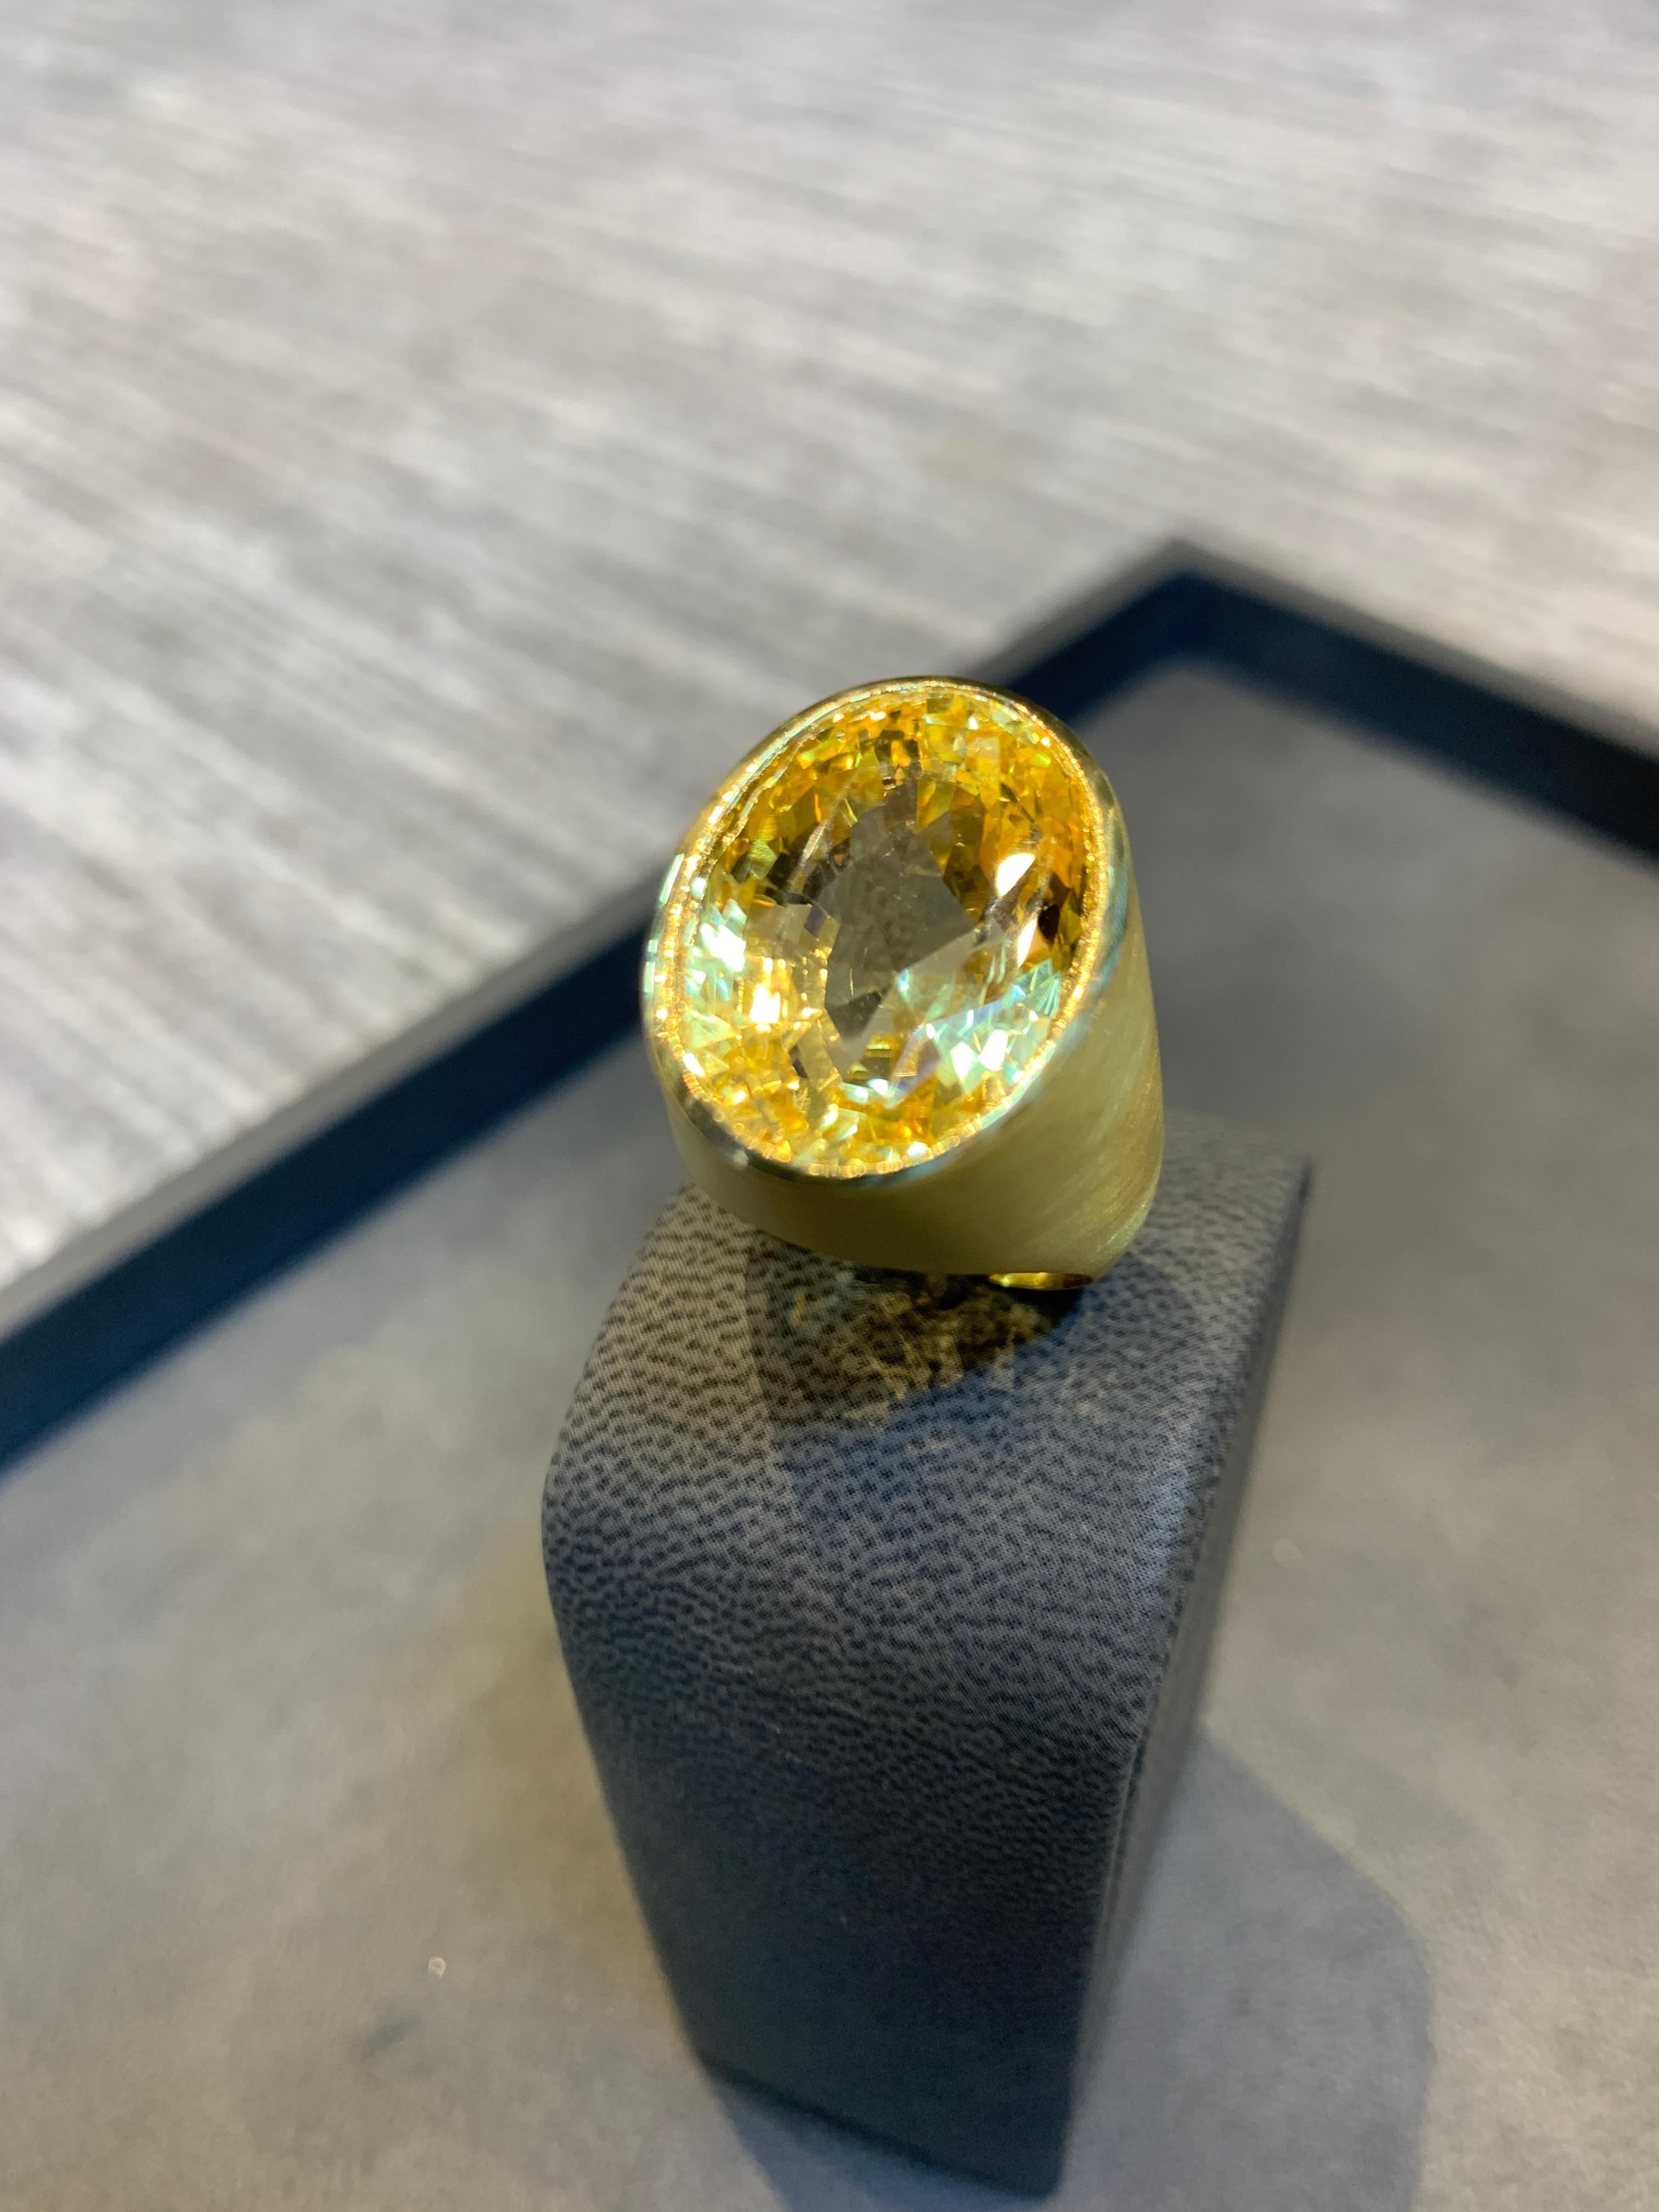 41.33 Carat Natural Yellow Sapphire Gold Men's Ring
Center Stone Weight: 41.33 Cts 
18K Matte Yellow Gold 
AGL Certified  as Natural No Heat 
Ring Size: 9.75
Re-sizable to any size free of charge 